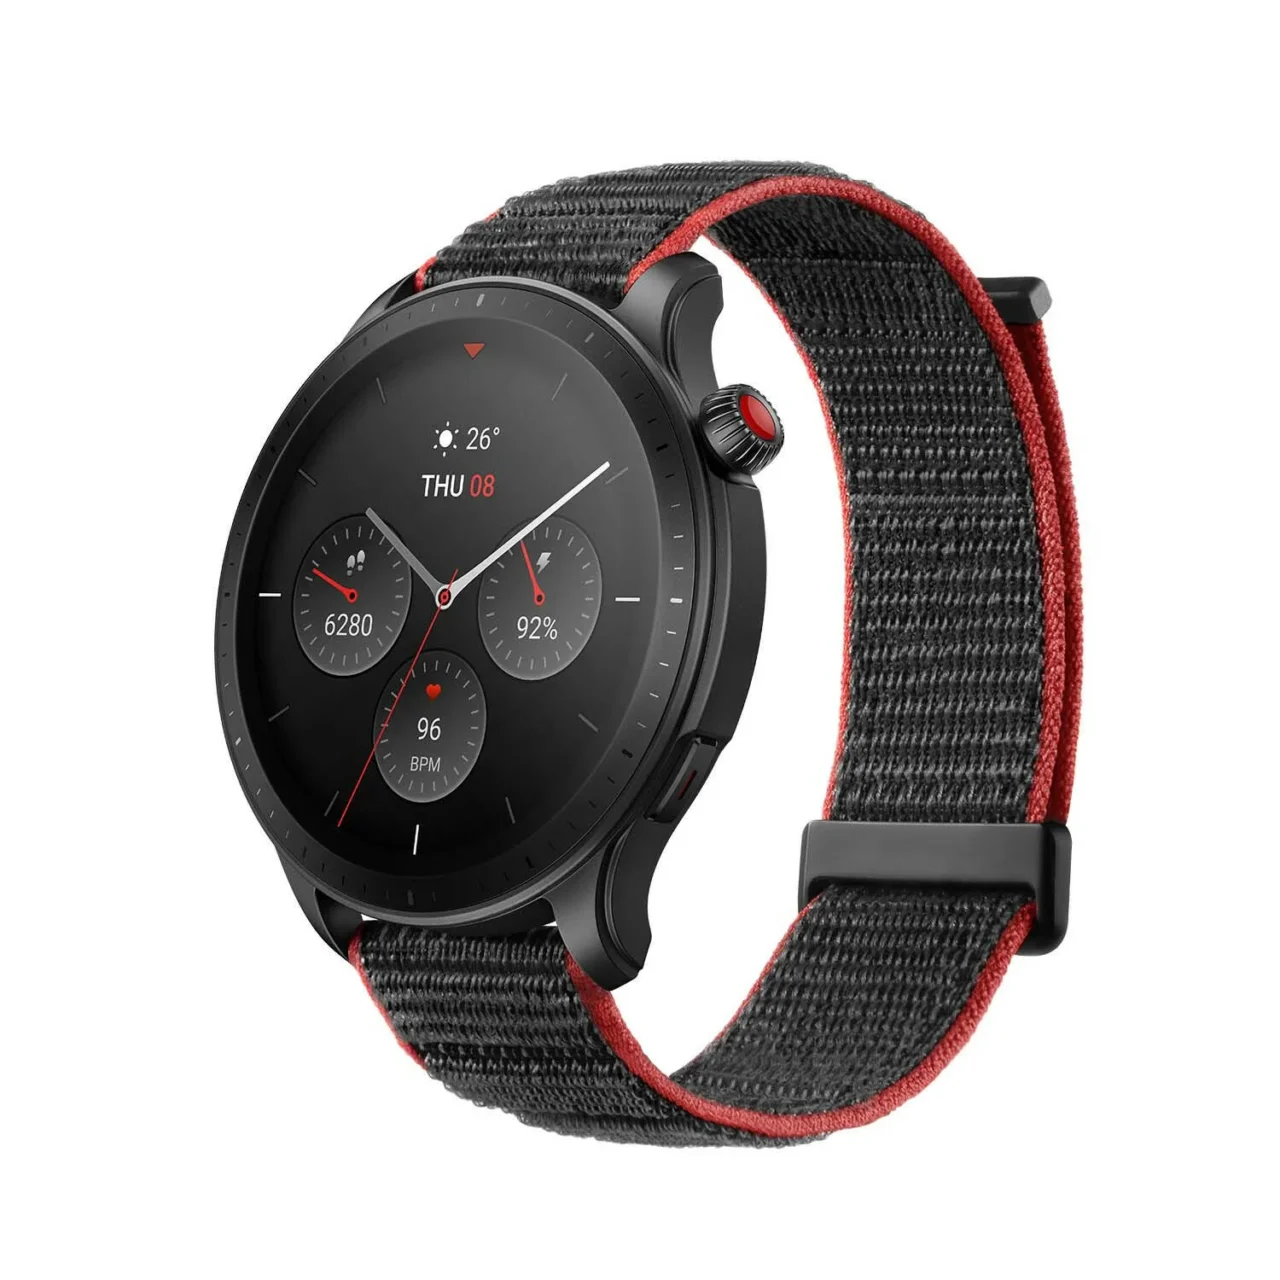 Amazfit Active Edge Rugged Smartwatch Launched in India